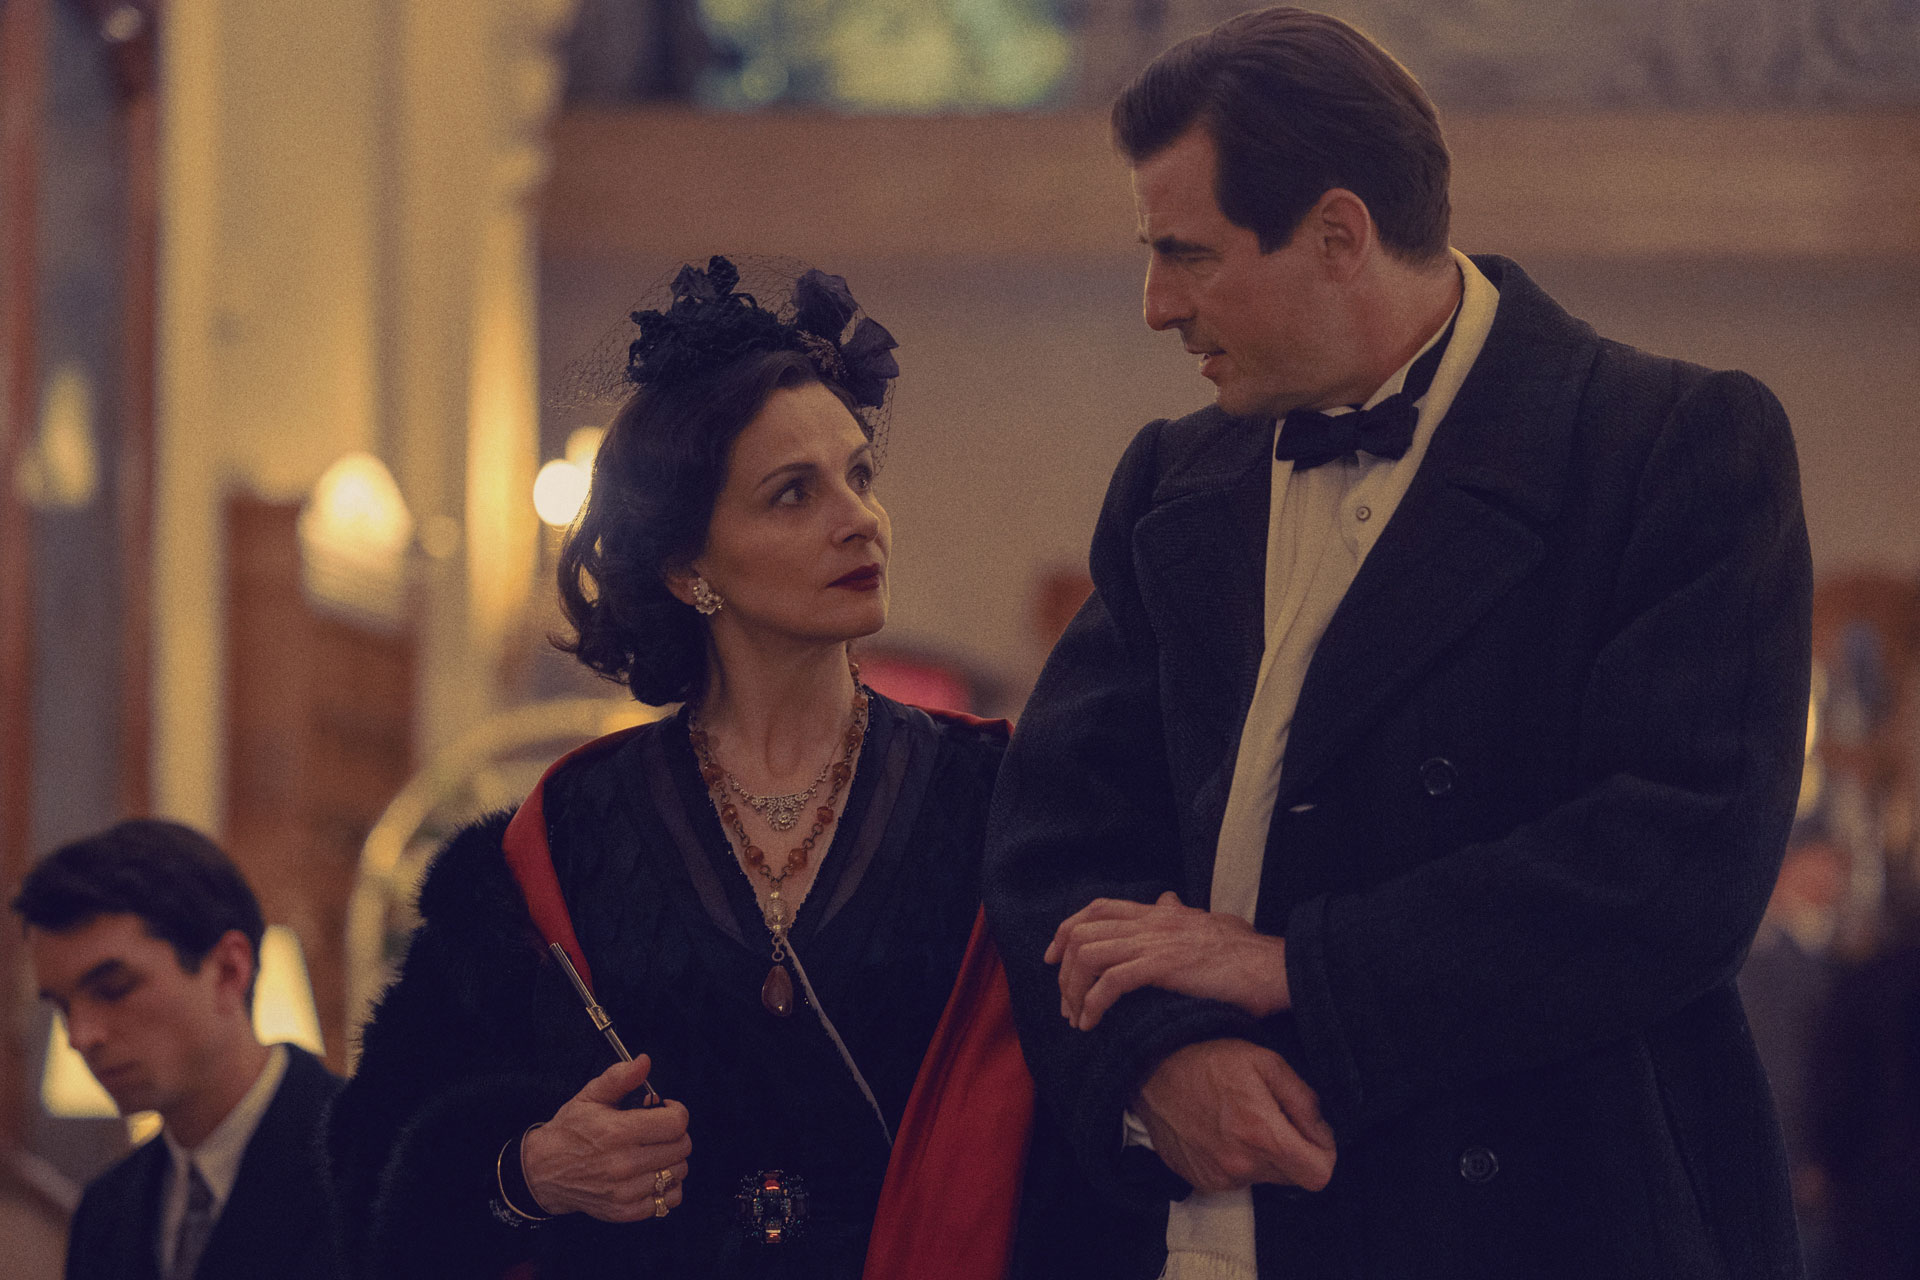 Juliette Binoche and Claes Bang in The New Look